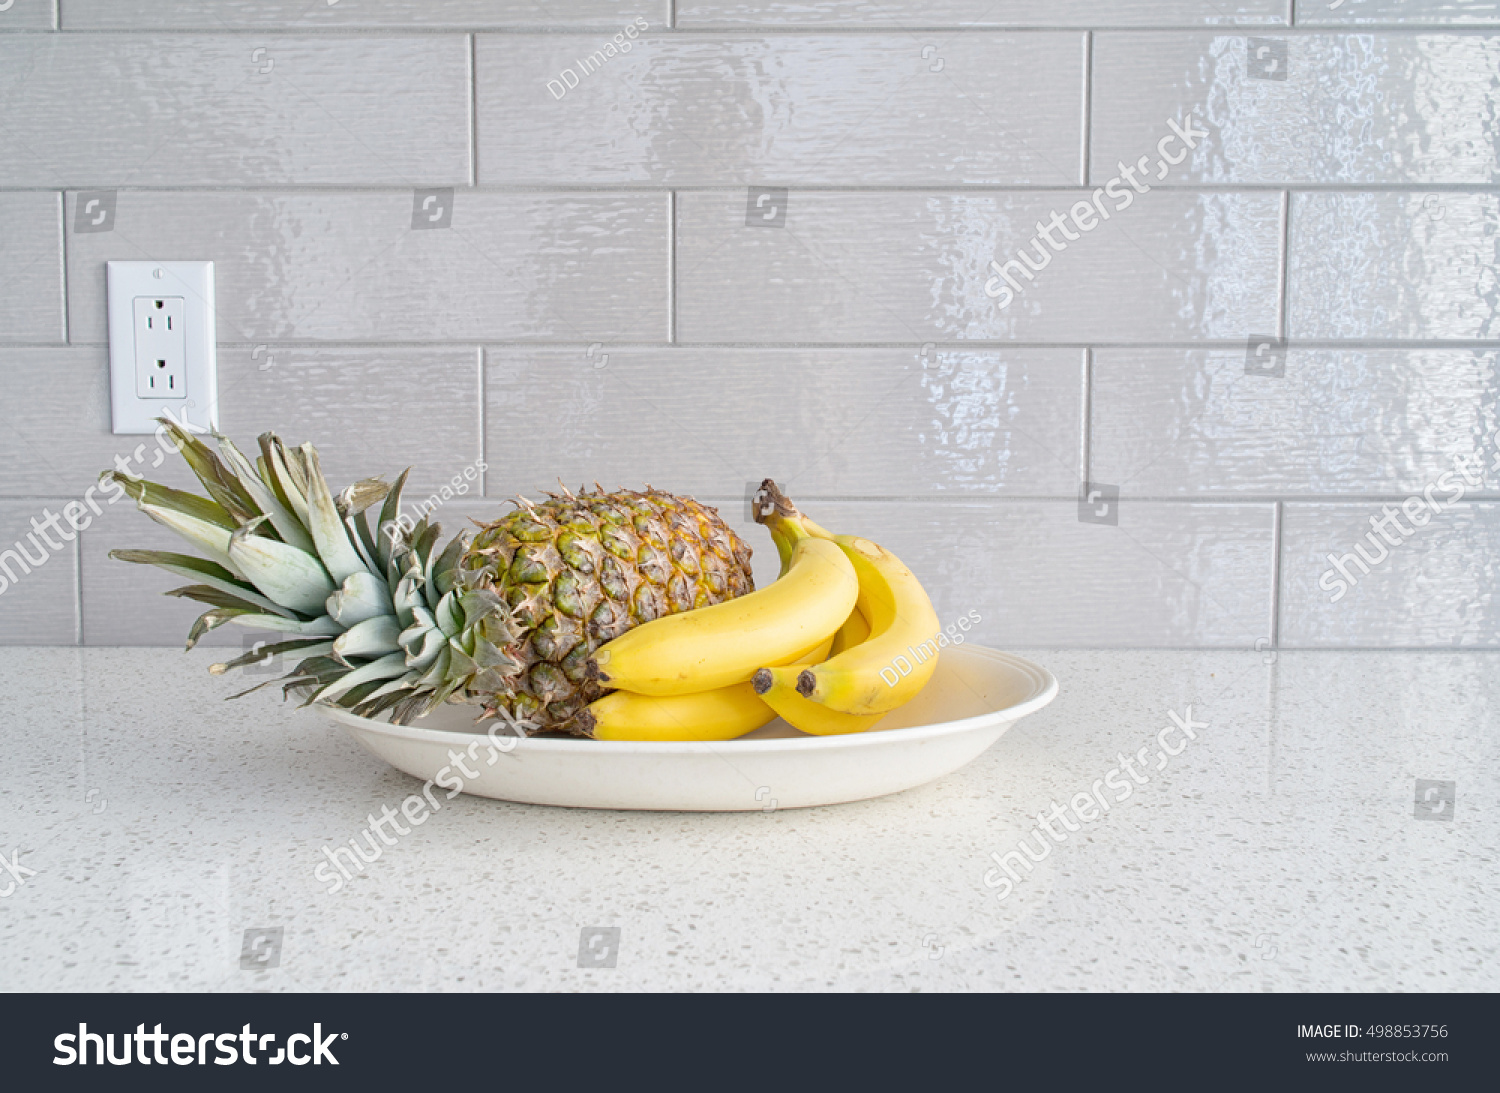 Modern Kitchen Countertop Fruits Dish Against Stock Photo Edit Now 498853756,How To Make An Envelope With A3 Paper